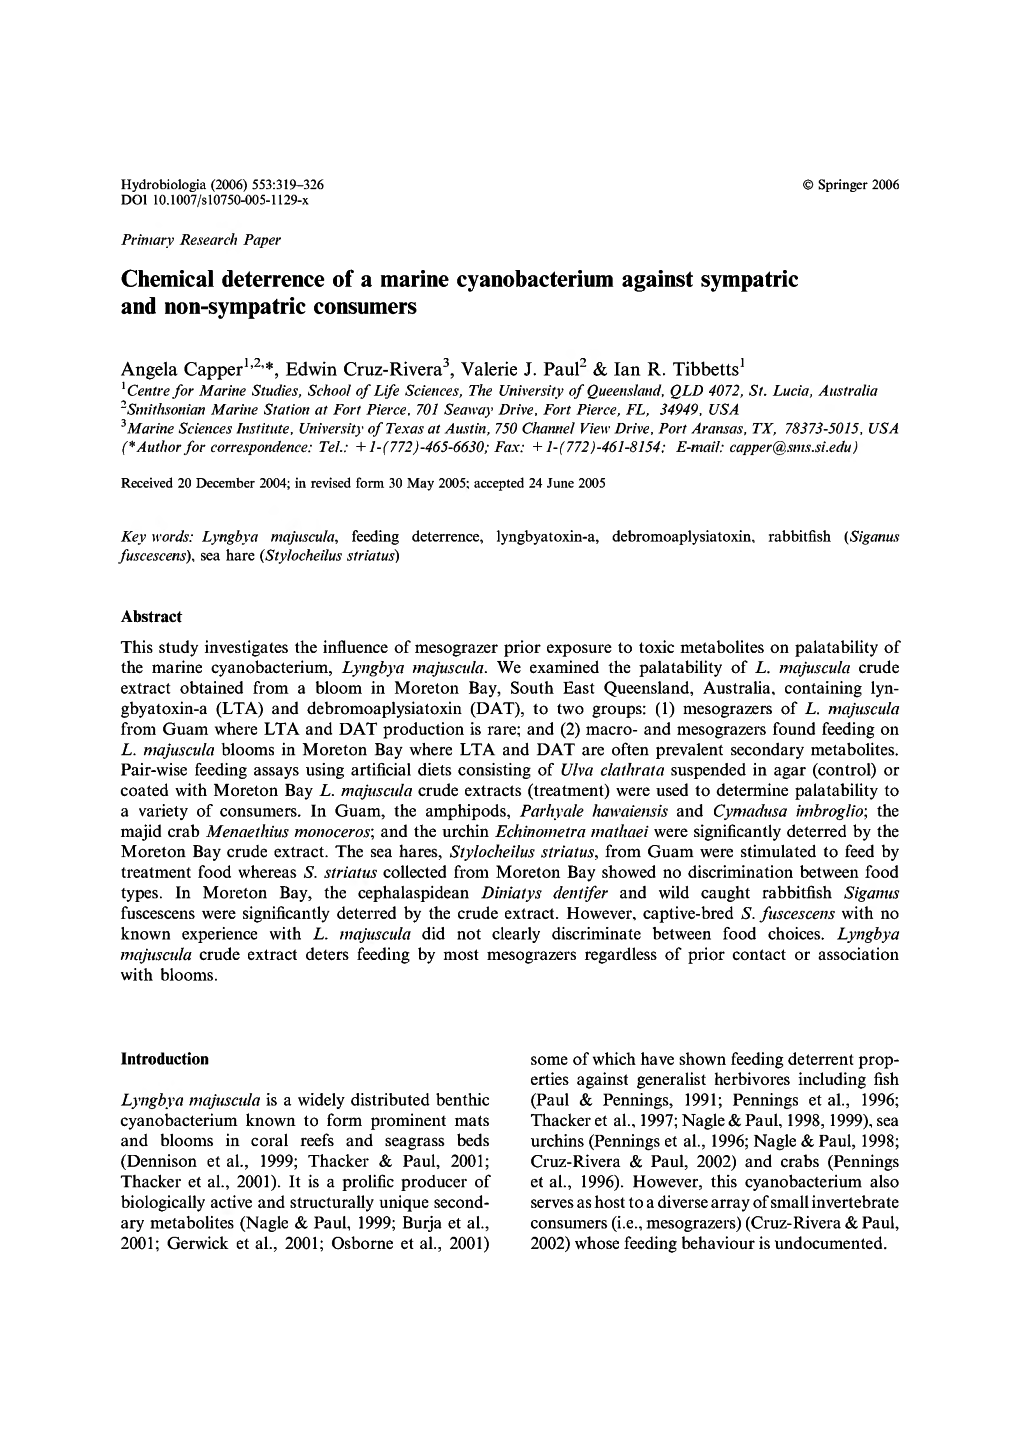 Chemical Deterrence of a Marine Cyanobacterium Against Sympatric and Non-Sympatric Consumers